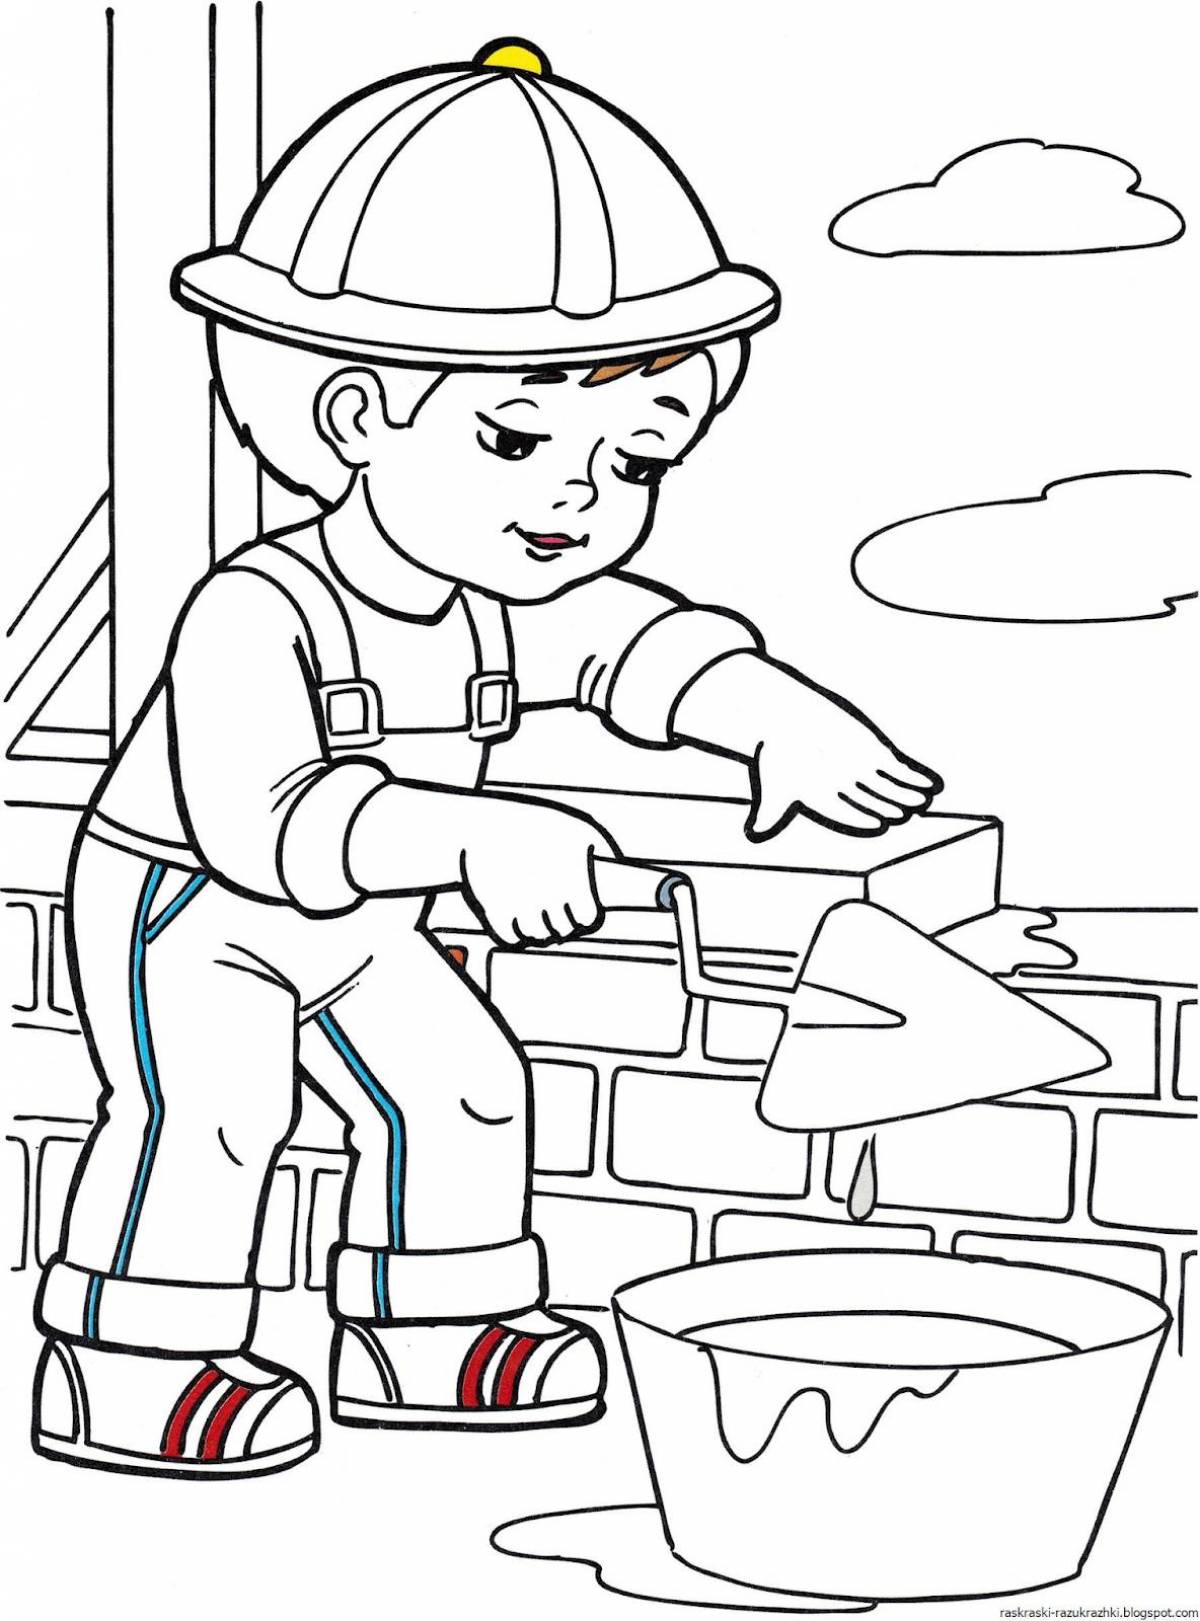 Fun job coloring pages for 3-4 year olds